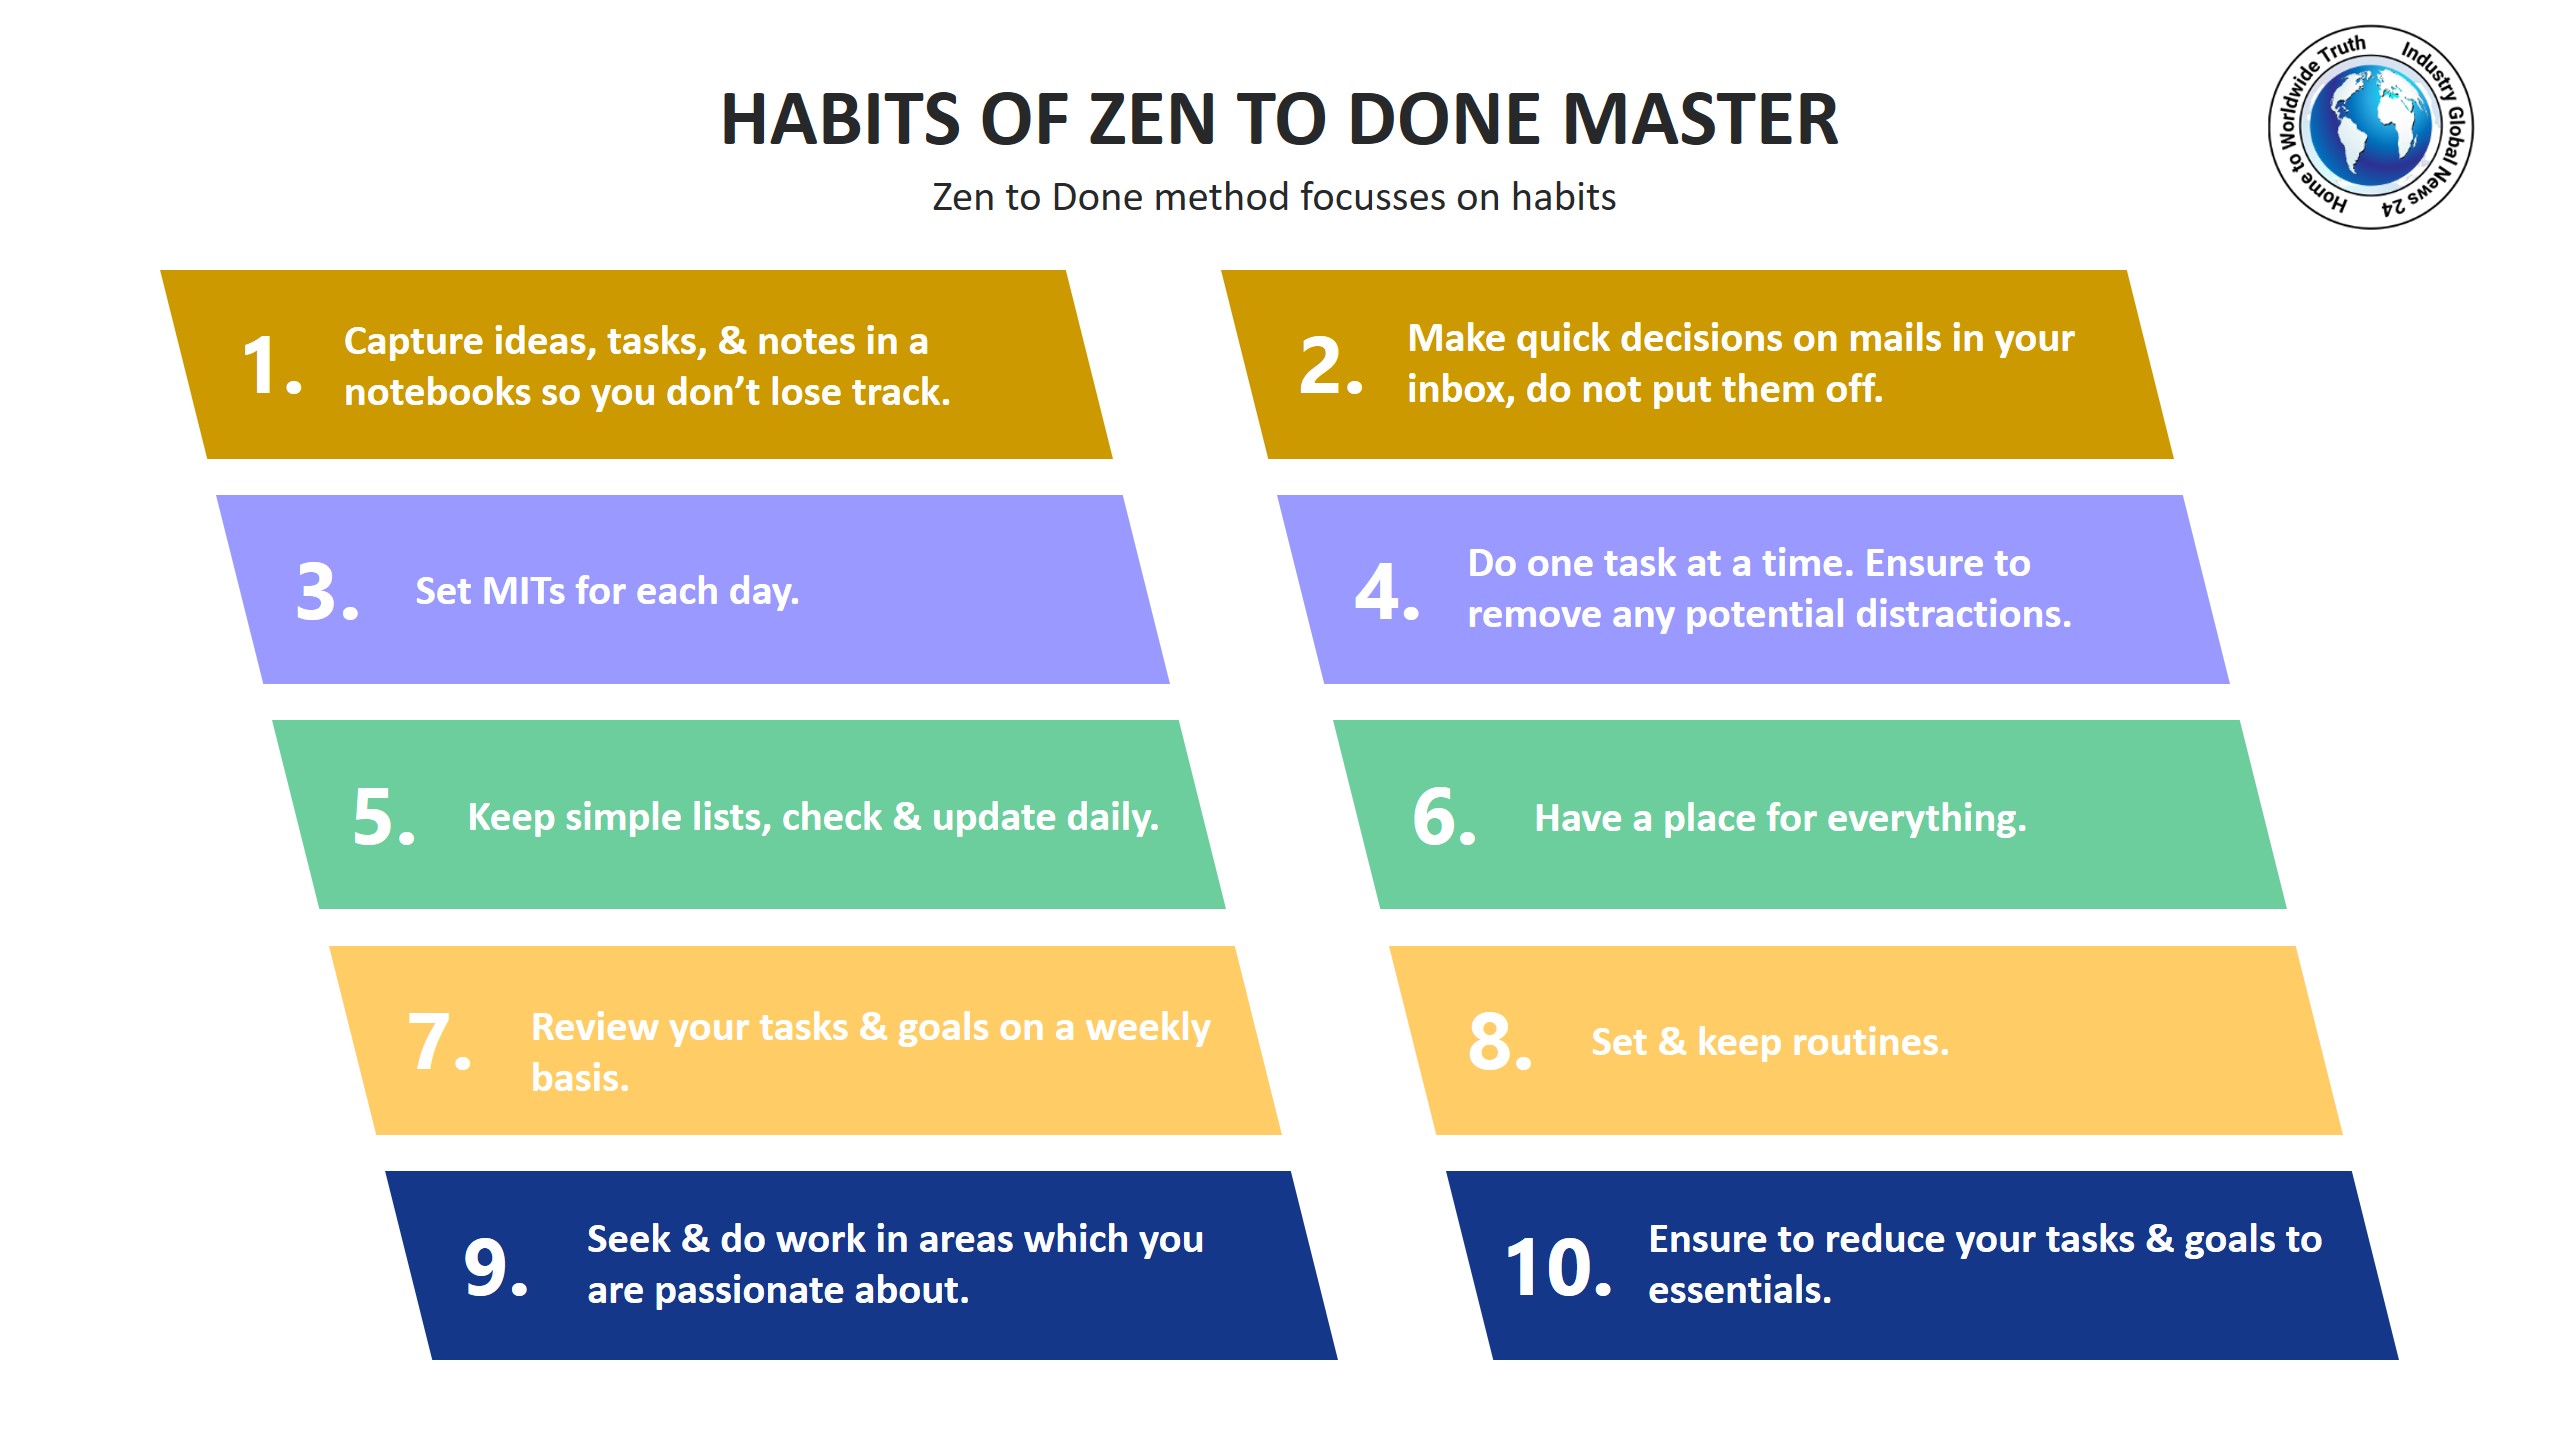 Habits of Zen to Done master